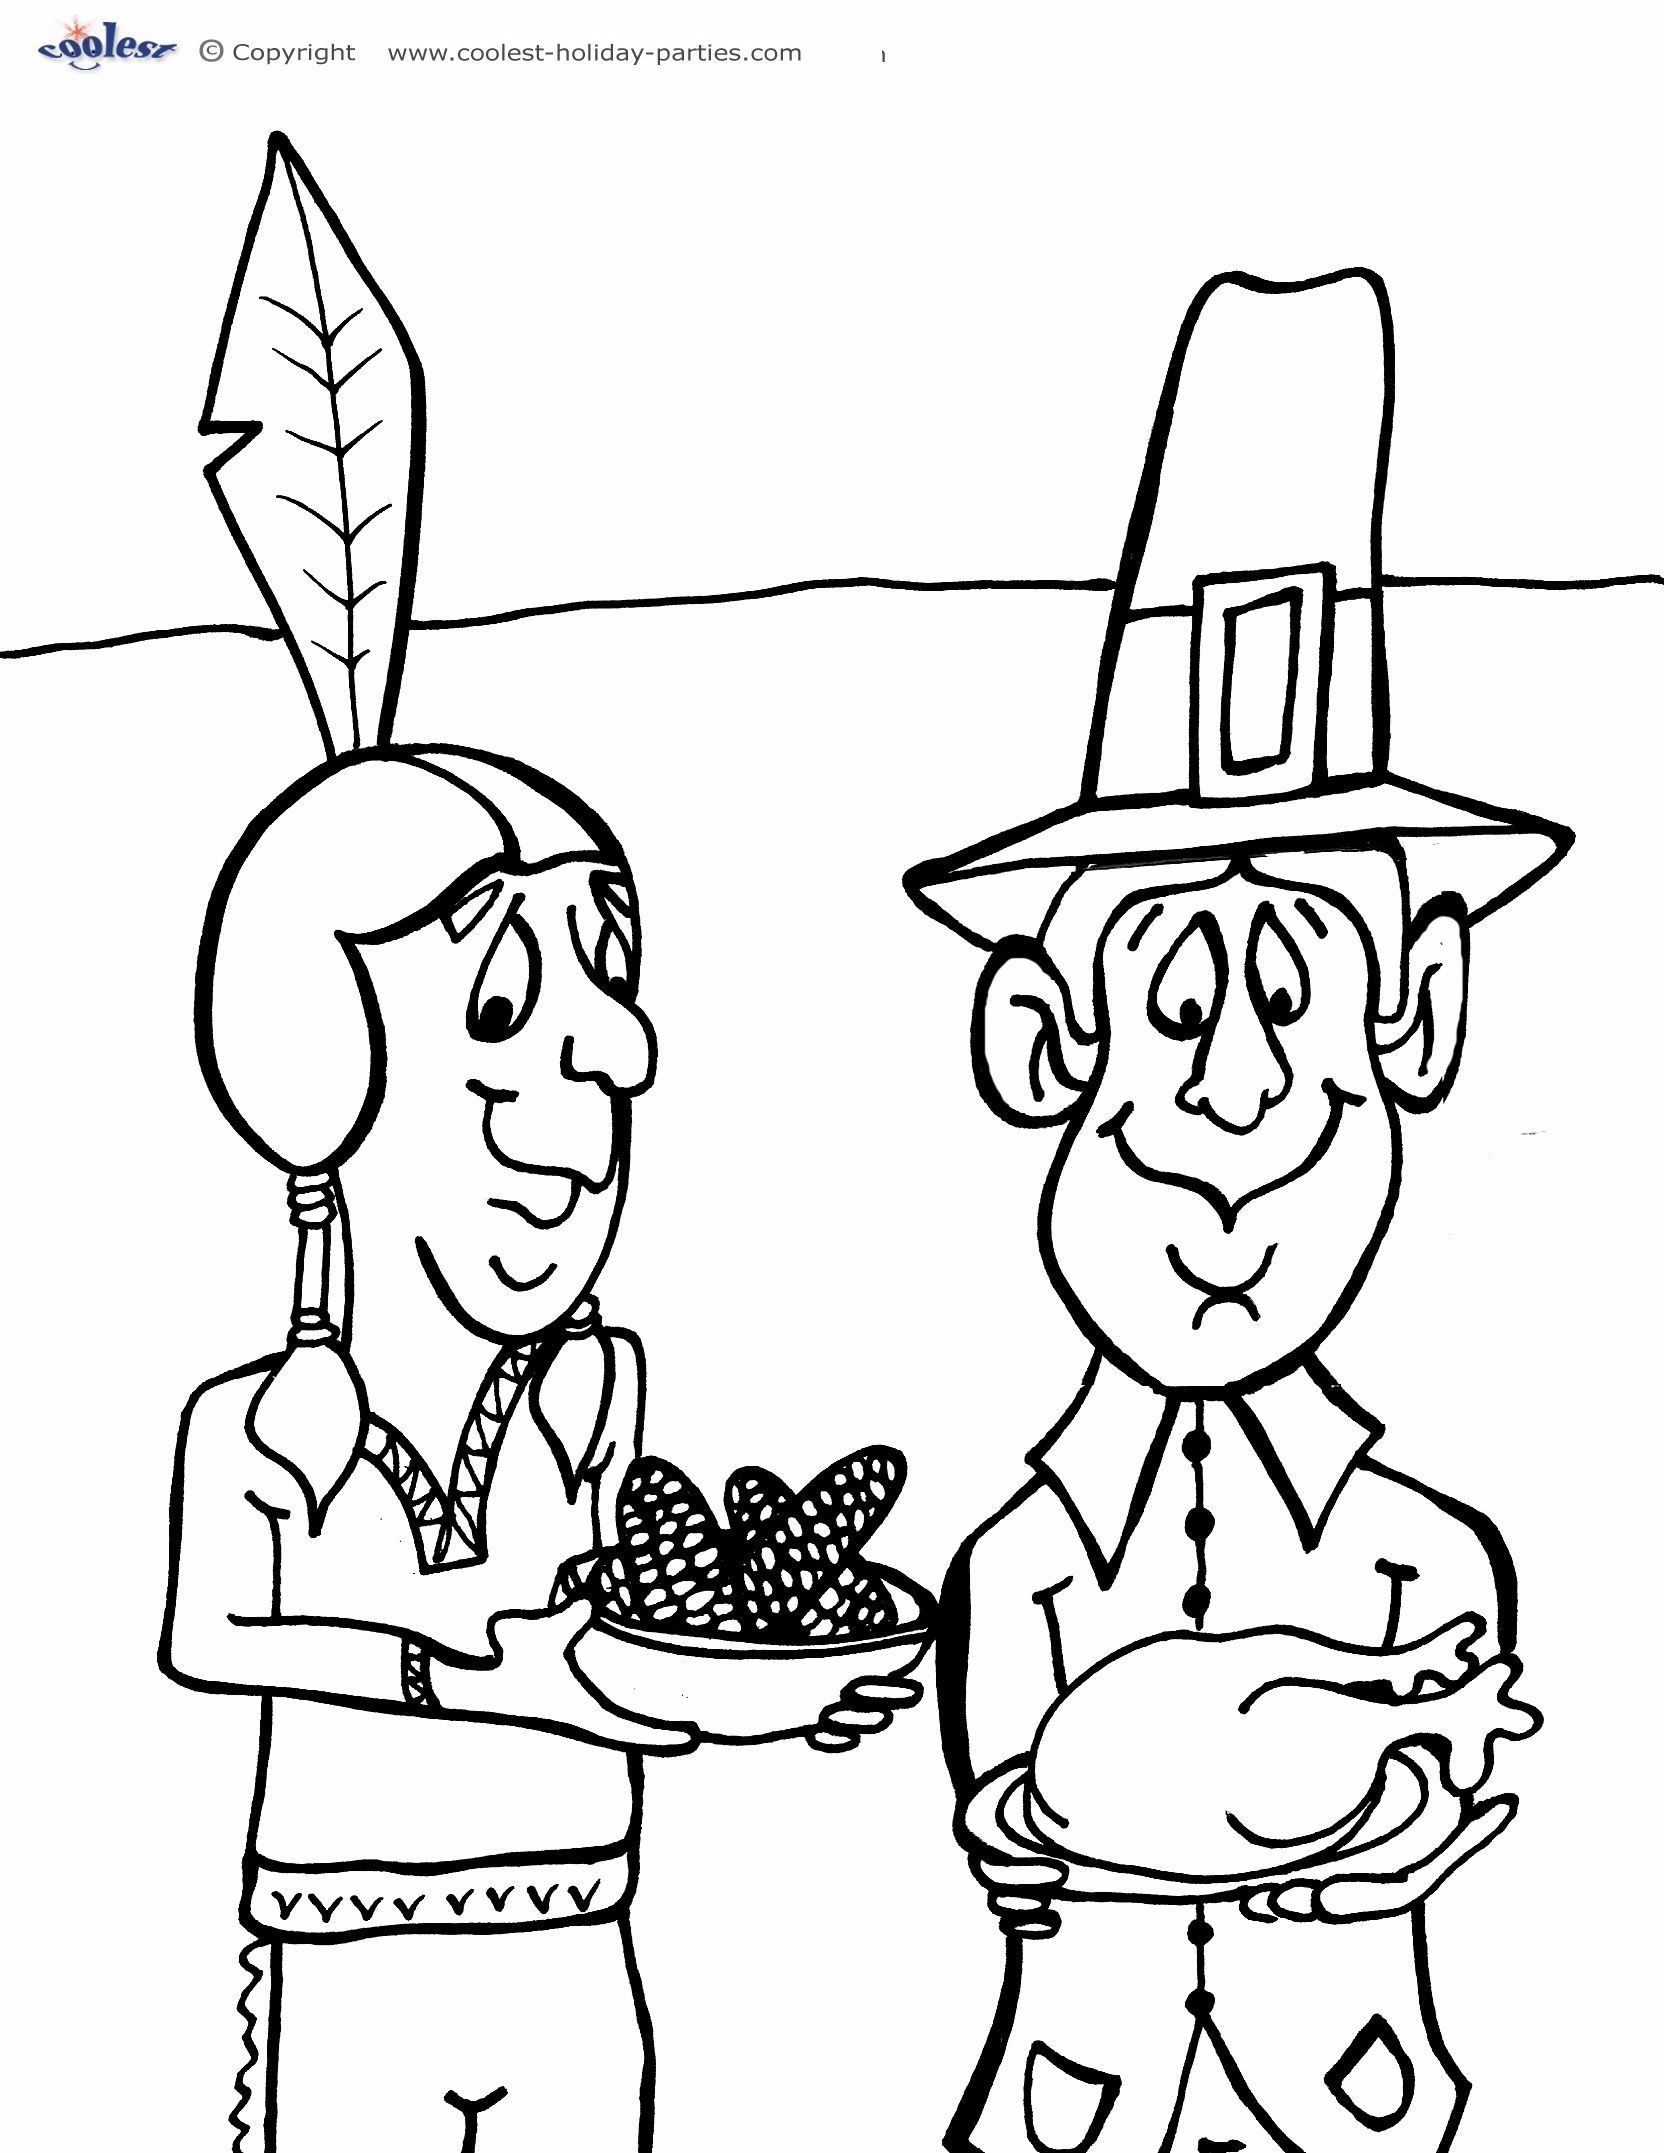 20 Free Pictures for: Pilgrim Coloring Pages. Temoon.us